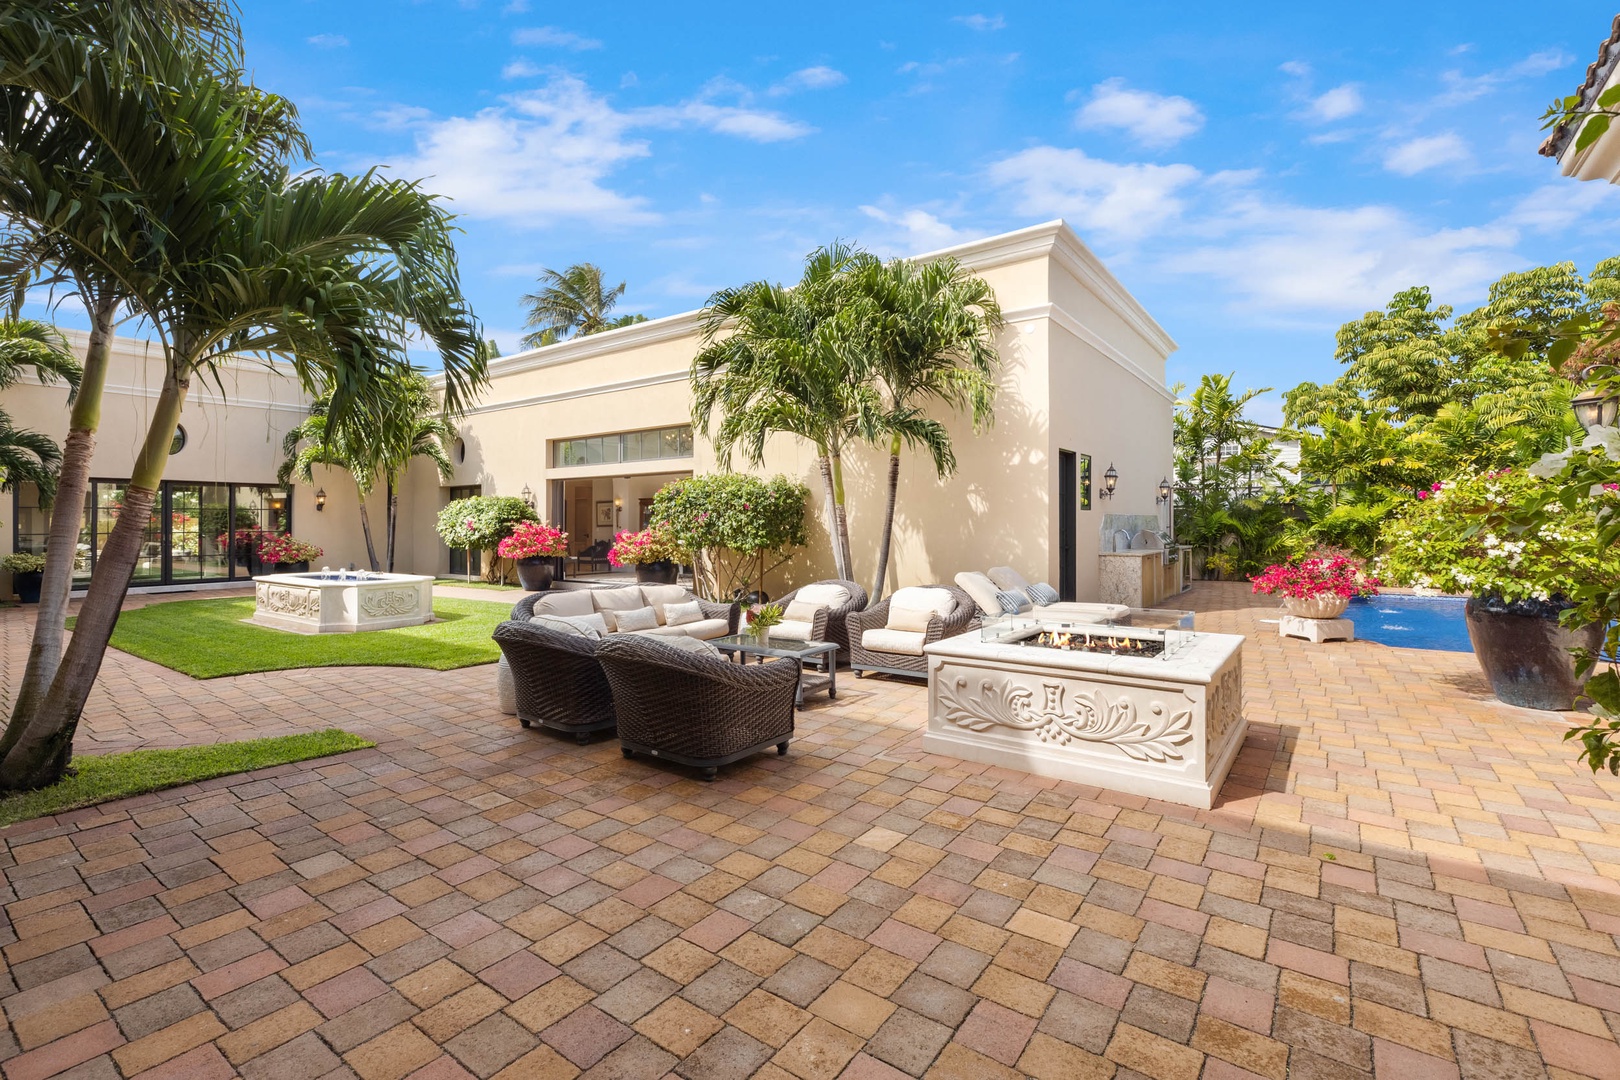 Honolulu Vacation Rentals, Royal Kahala Estate - Outdoor lanai with a luxurious lounge area, perfect for entertaining or relaxation under the palm trees.